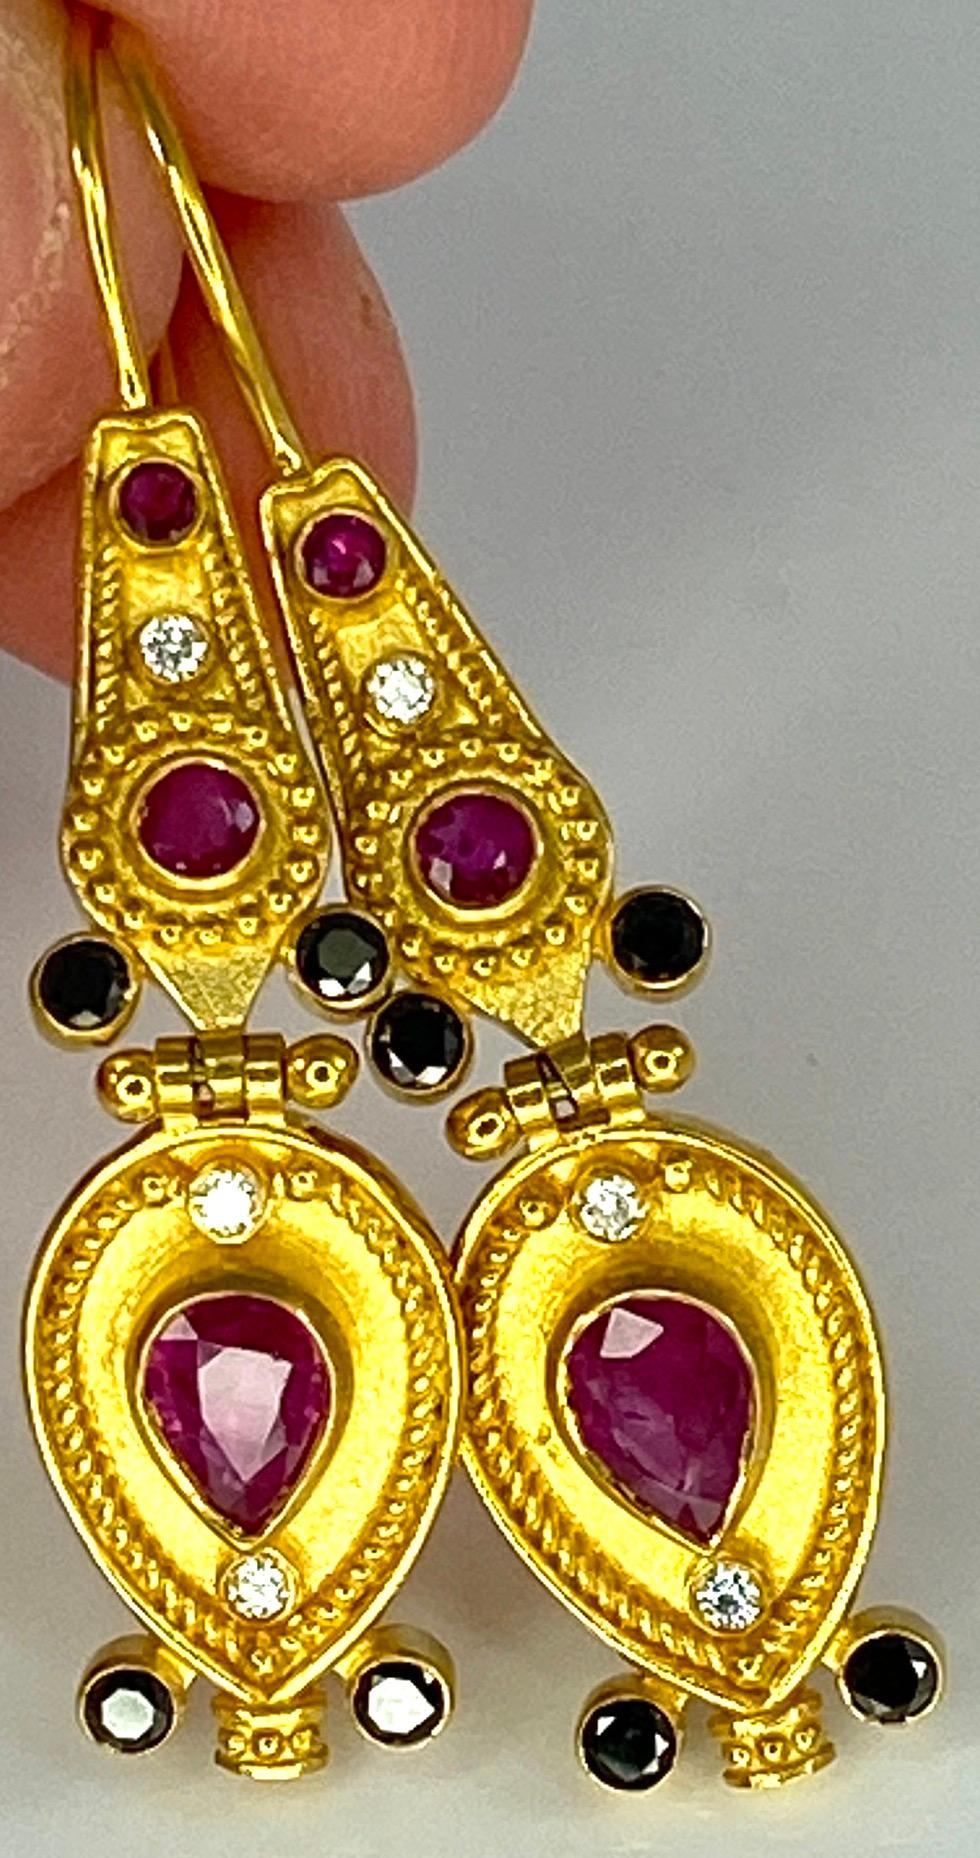 S.Georgios designers Byzantine-era style 18 Karat Yellow Gold earrings are hand-made with granulation workmanship done microscopically and are finished with a unique velvet background. 
The gorgeous pair features 2 Pear-cut and 4 brilliant-cut